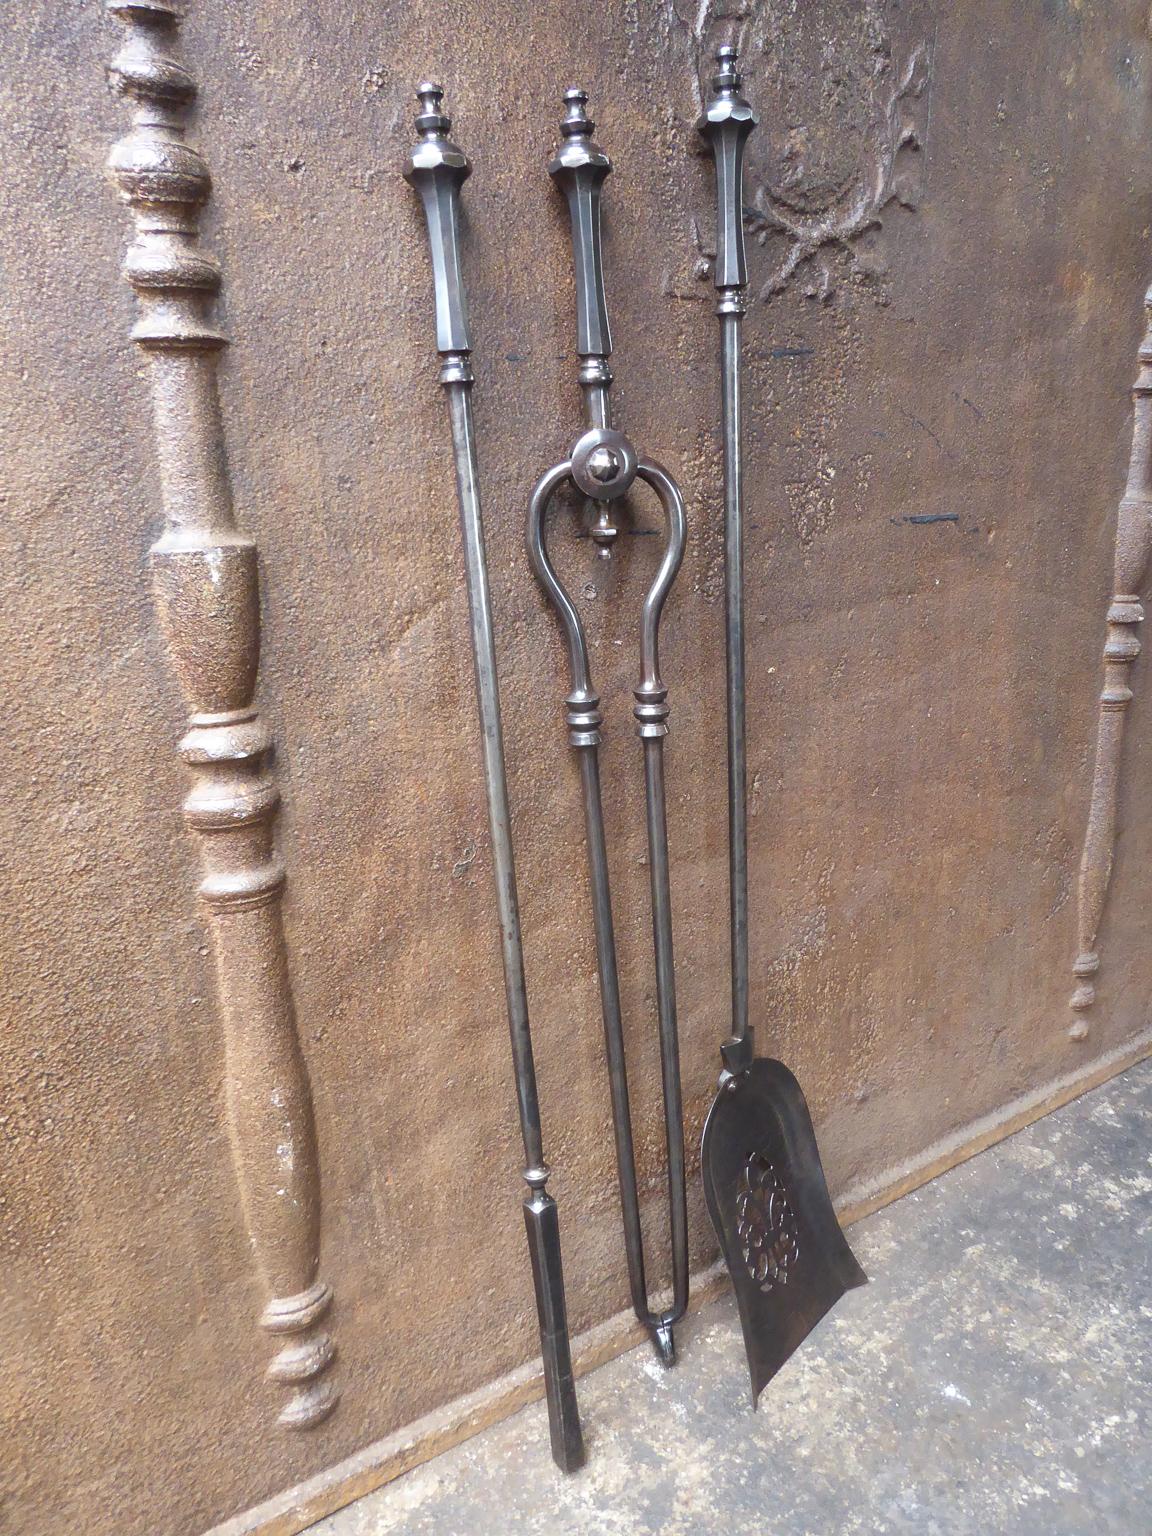 Beautiful 19th century English Victorian set of of three tools with ring-banded shafts, knopped finial handles and a finely pierced & cut shovel. The  fire tools are made of wrought iron. The set is in a good condition and is fully functional.